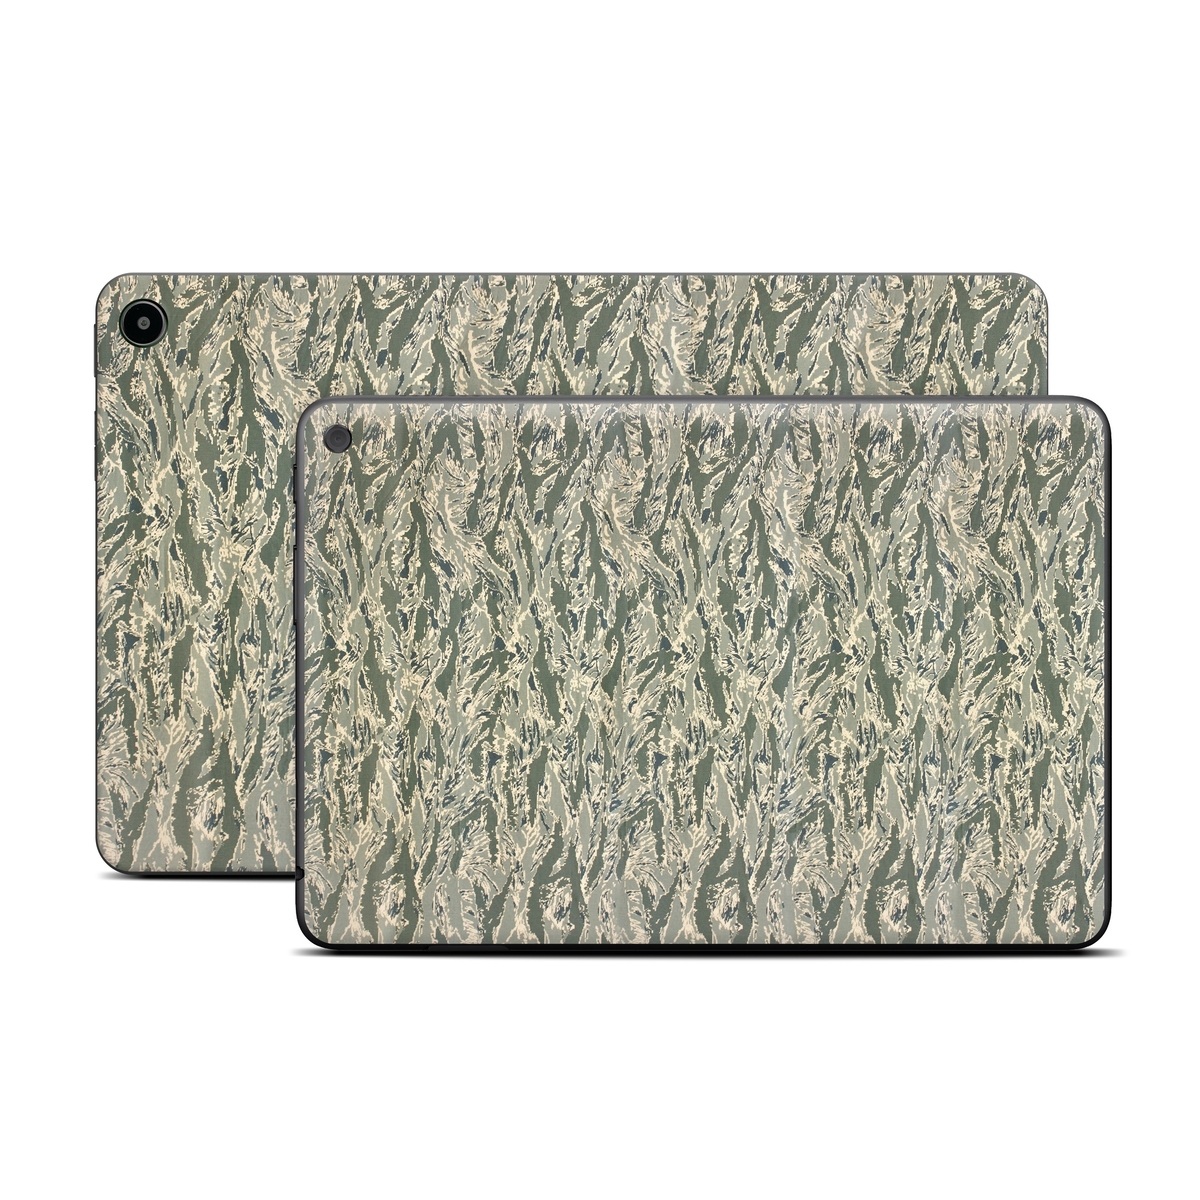 Amazon Fire Tablet Series Skin Skin design of Pattern, Grass, Plant, with gray, green colors